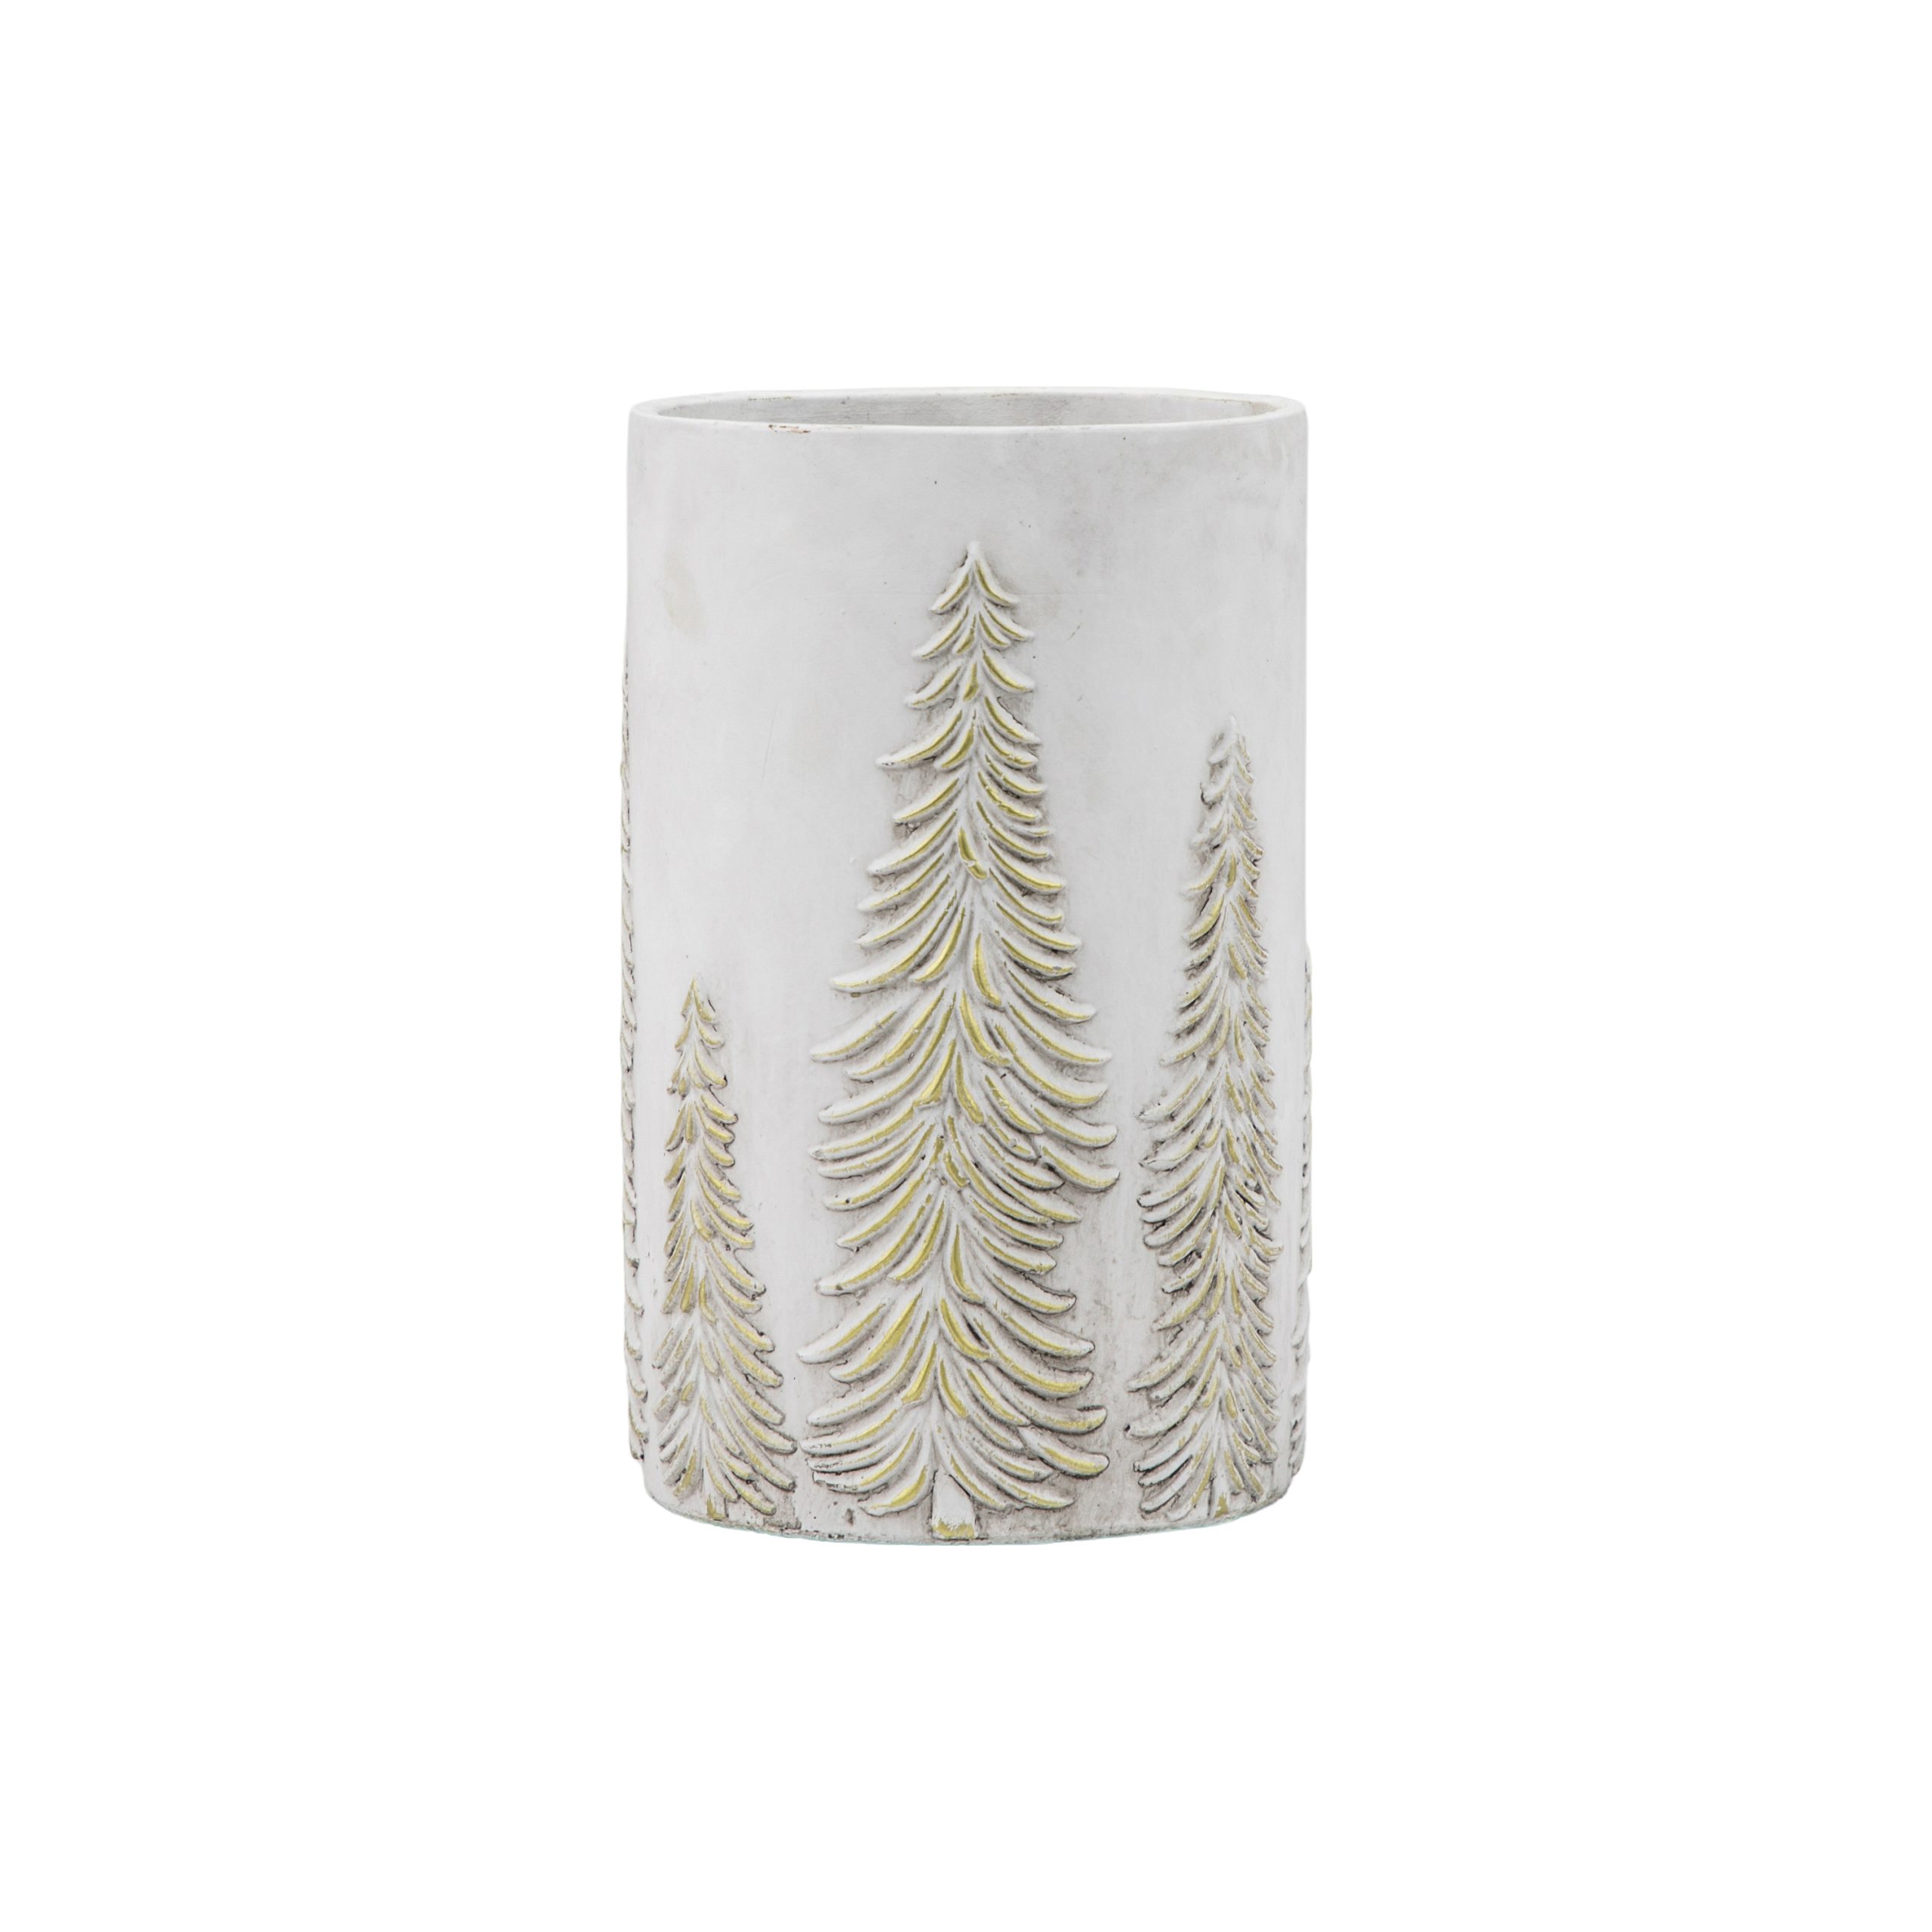 Gallery Direct Forest Vase White & Gold